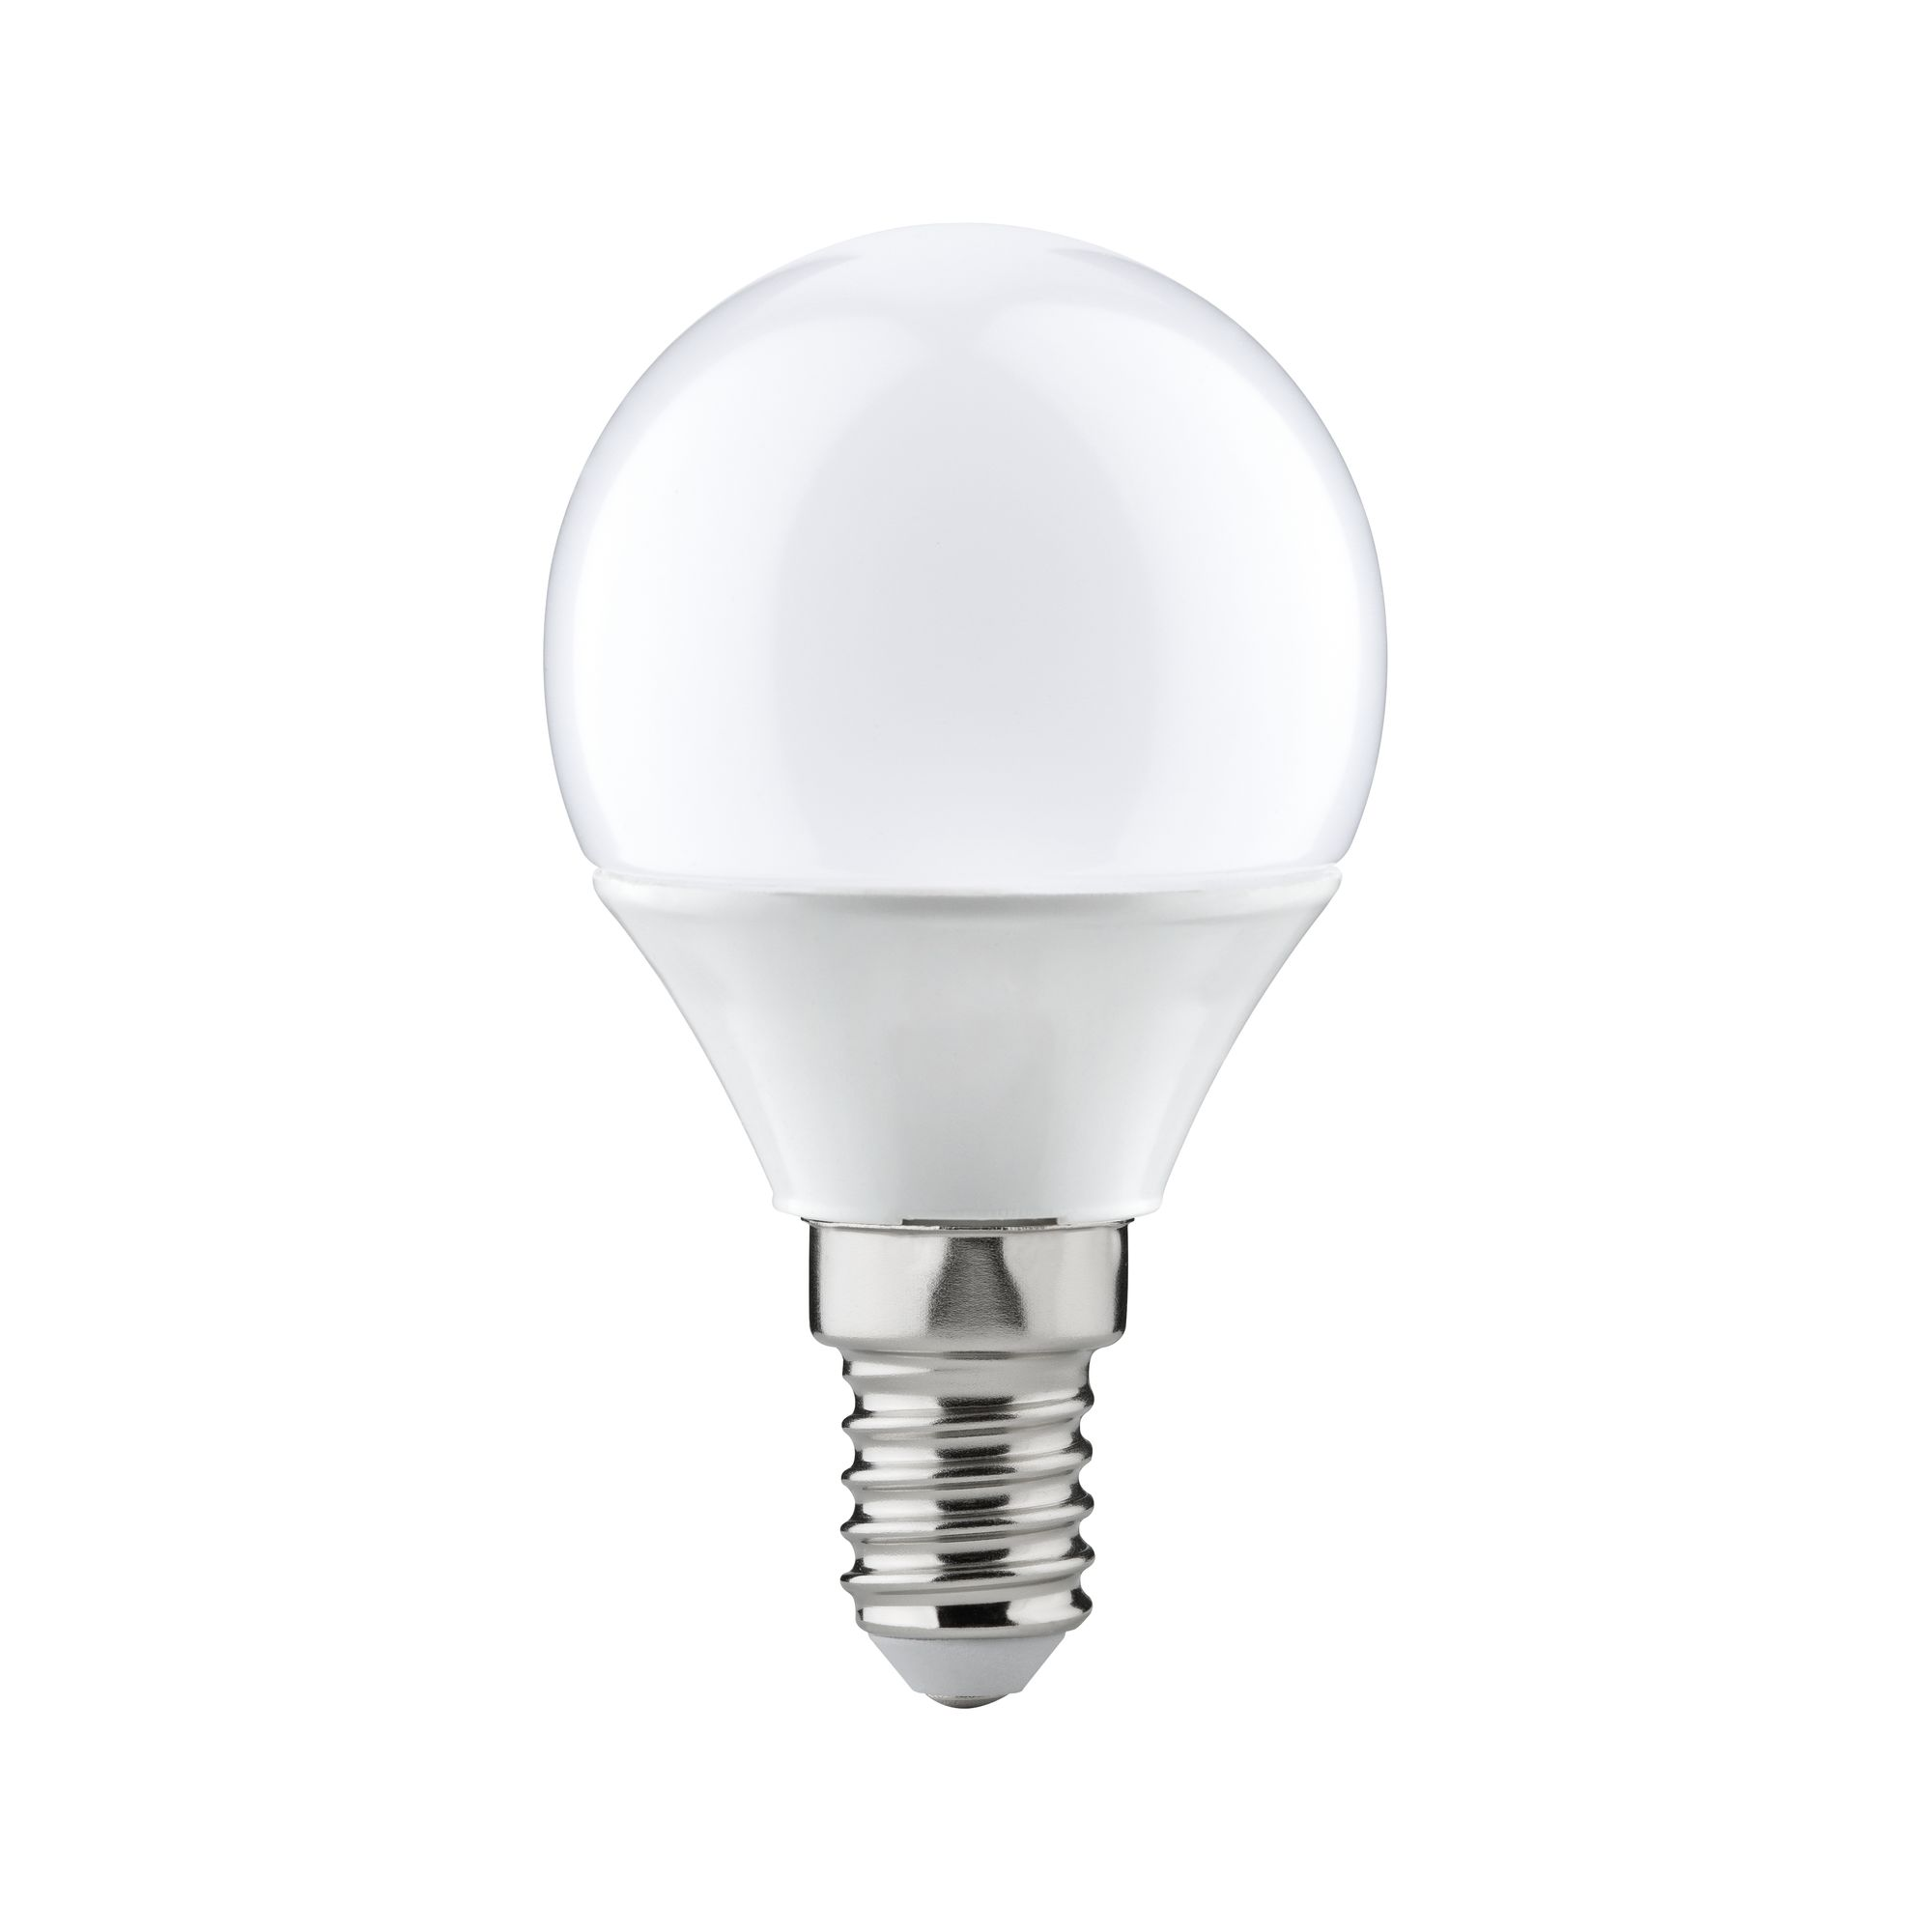 LED-Tropfenlampe E14 3,5W (25W) 250 lm warmweiß + product picture